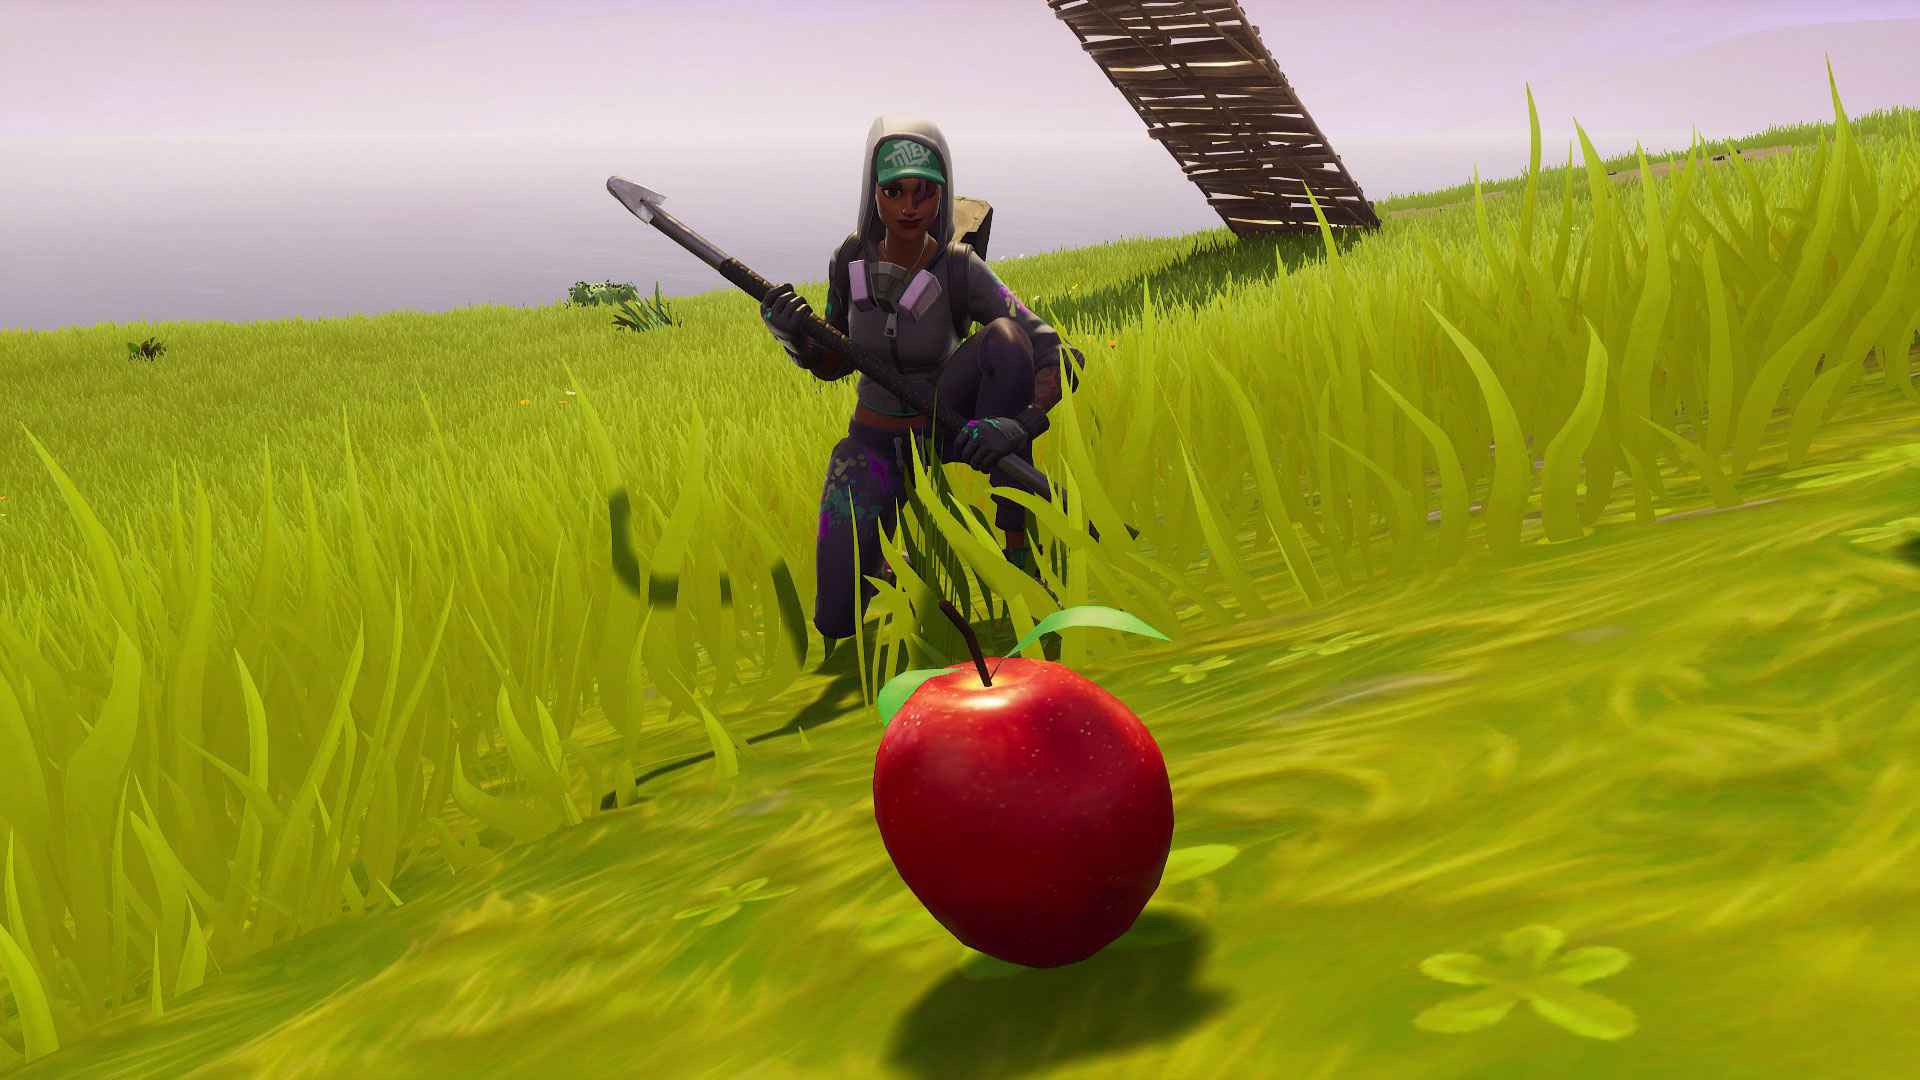 Fortnite Season 2 - Nine new consumables (Apple Sun, Cabbage, Corn) leaked for the game